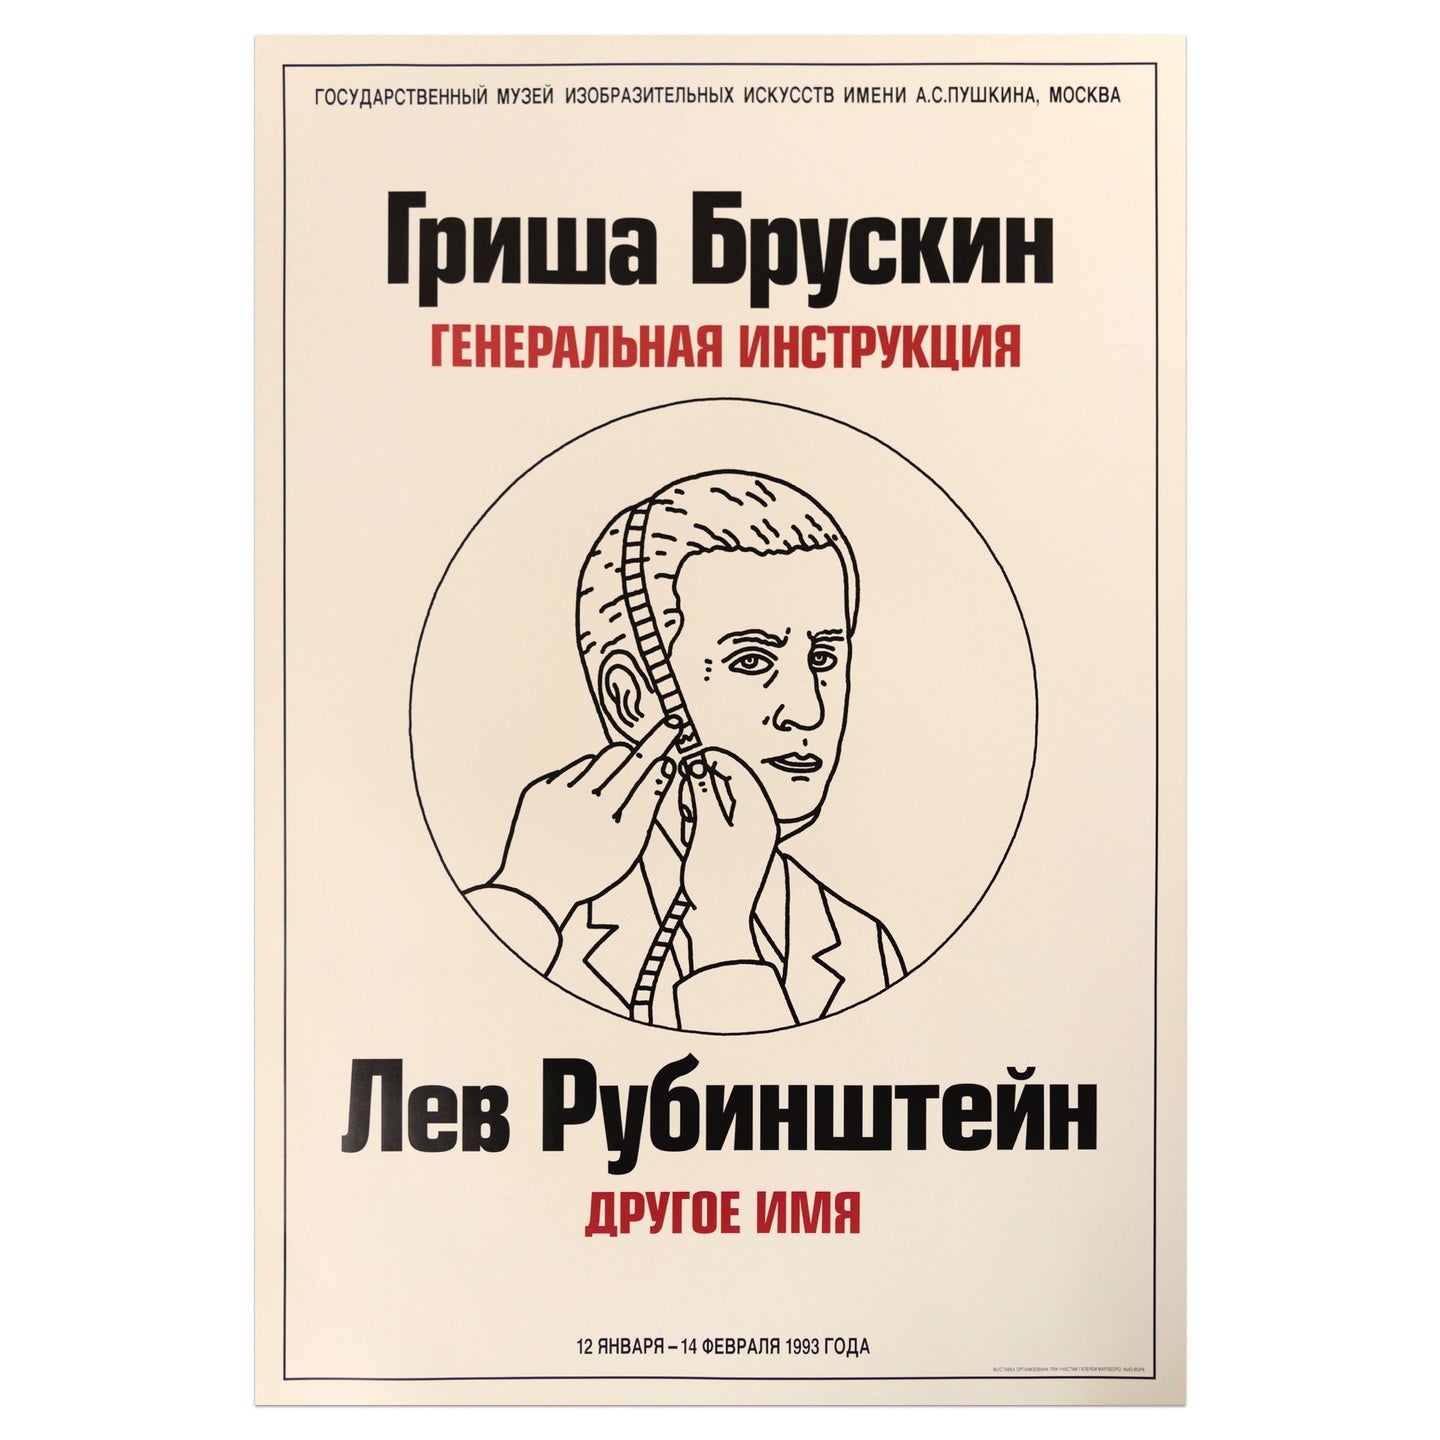 1993 Grisha Bruskin poster featuring black and red Russian text and an illustration of hands measuring a man's head